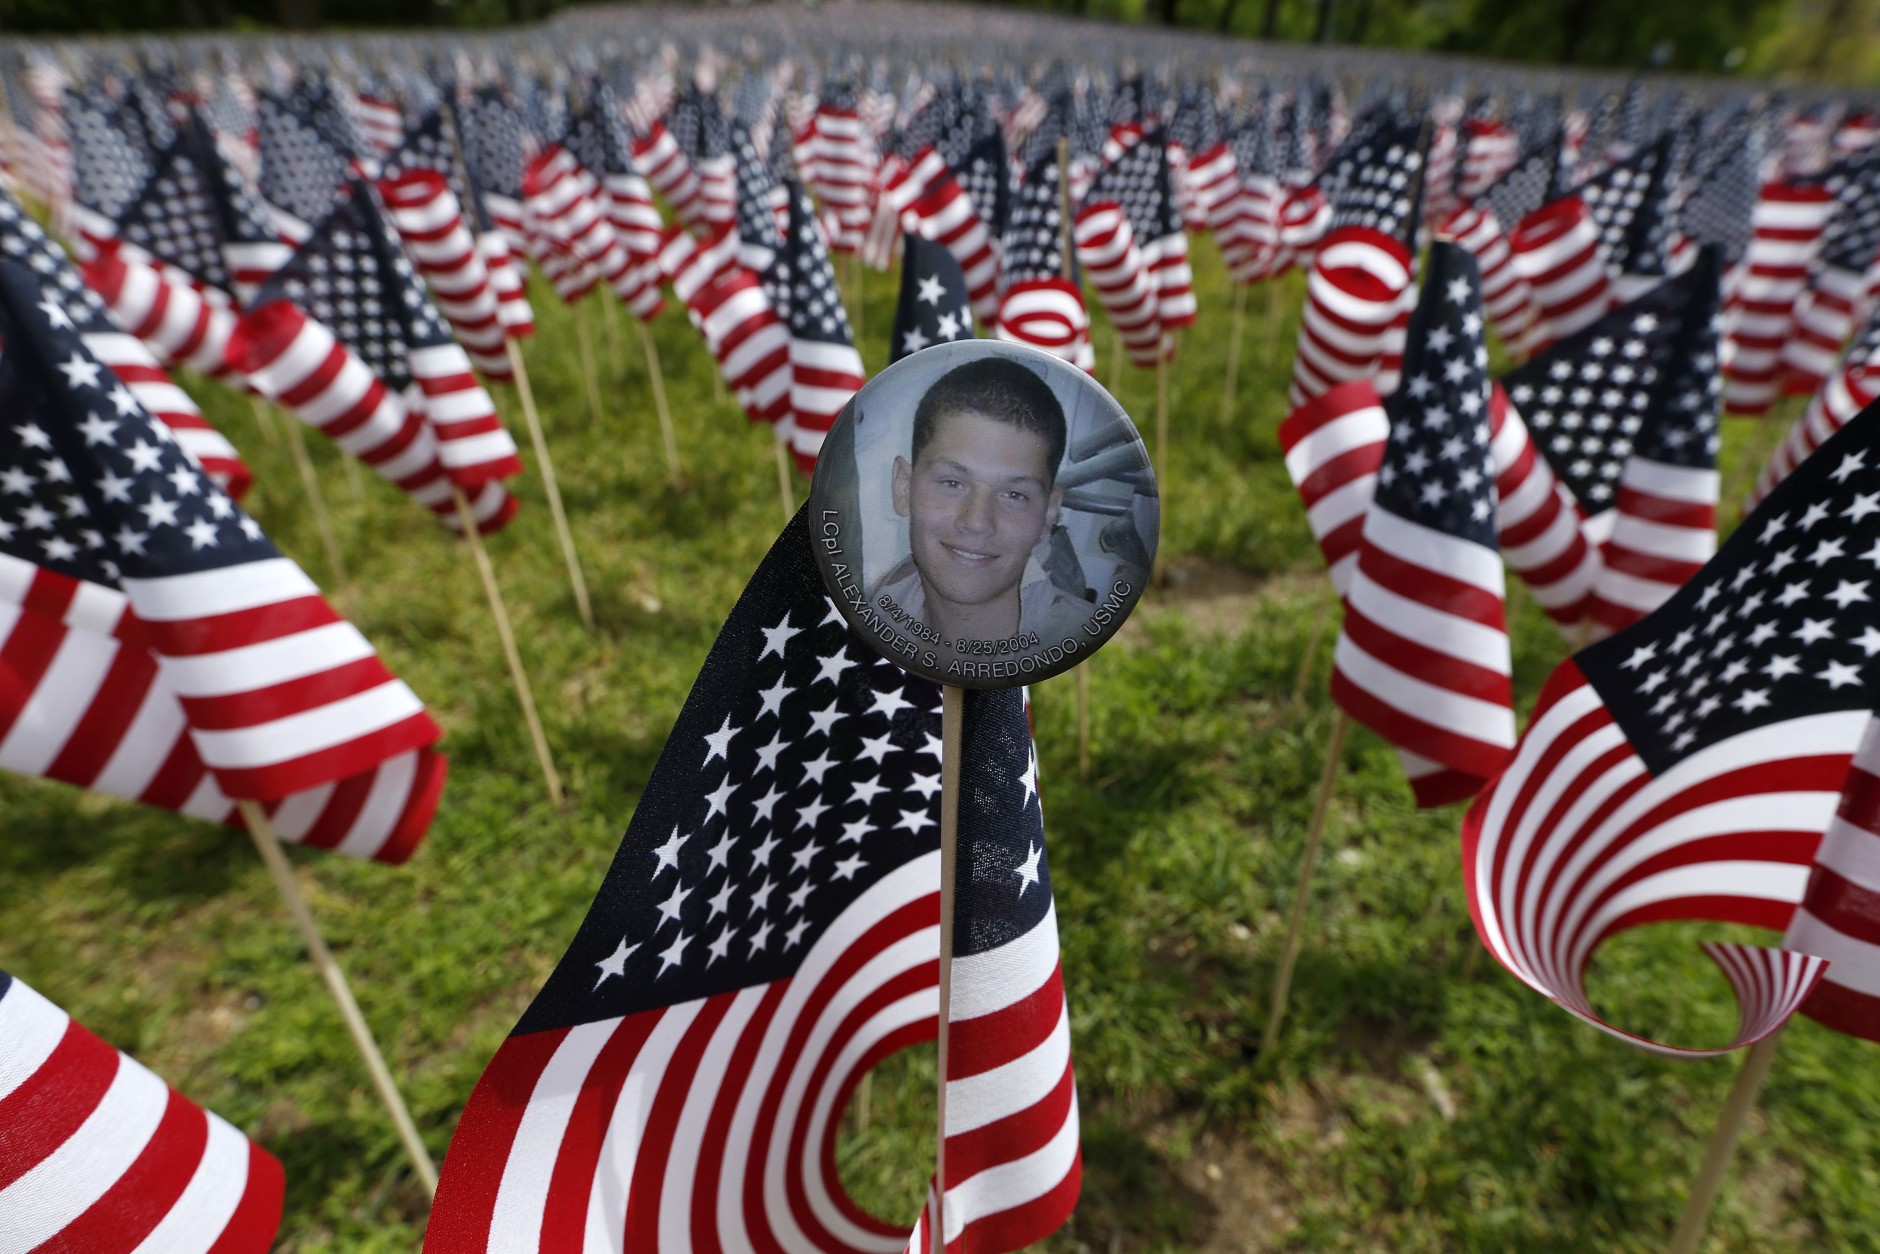 A bbadge with a photograph of Lcpl. Alexander Arredondo is seen attached to a flag in the Massachusetts Military Heroes Fund flag garden on Boston Common in Boston, ahead of Memorial Day, Thursday, May 21 2015. Each of the approximately 37,000 flags represents a Massachusetts military member who died in service from the Revolutionary War to the present. Arredondo is the son of Carlos Arredondo who helped victims at the scene of the Boston Marathon bombings. (AP Photo/Michael Dwyer)